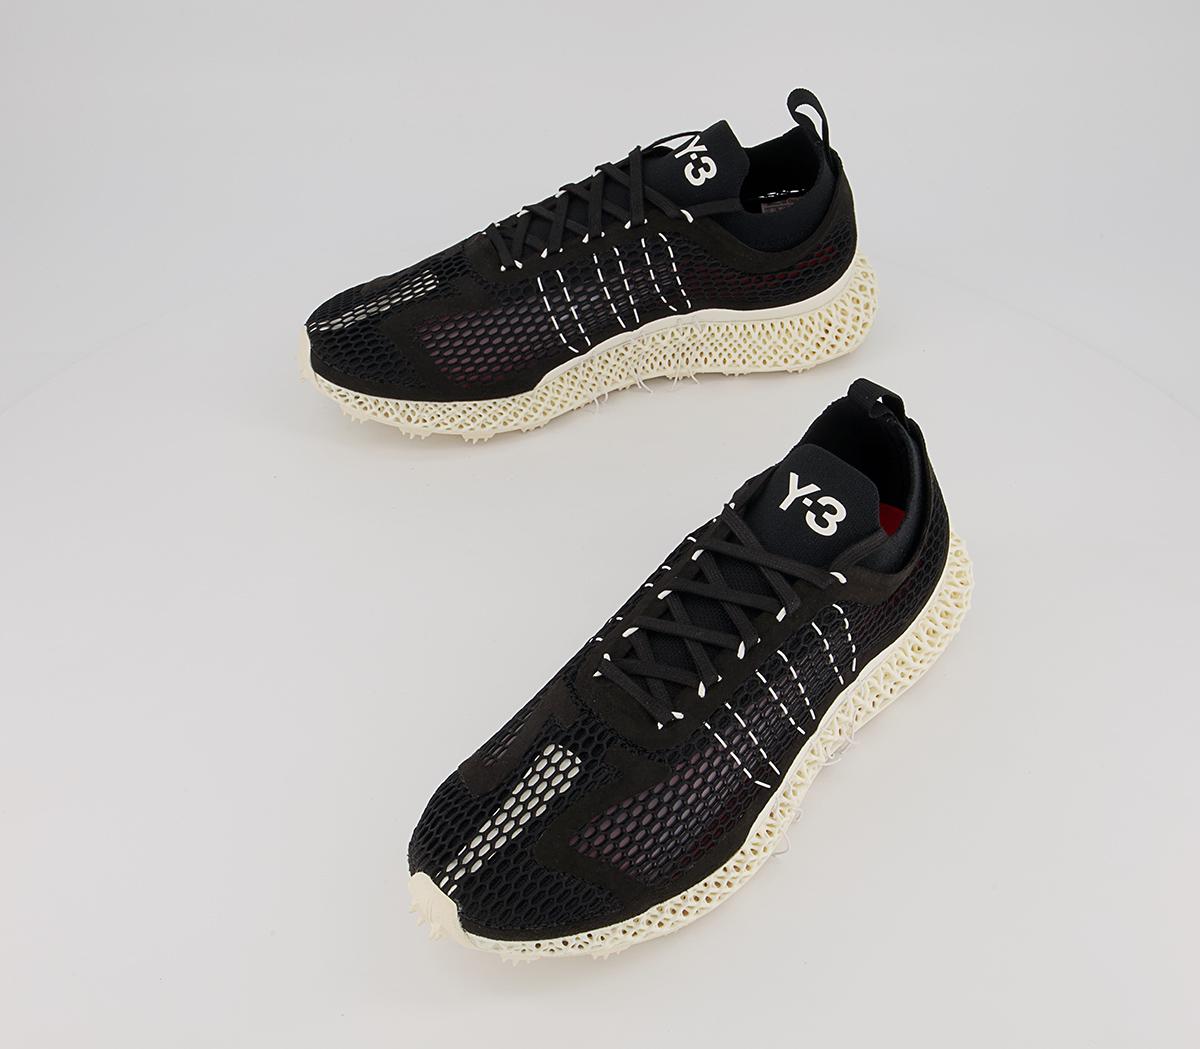 adidas Y-3 Y-3 Runner 4d Halo Trainers Black Core White Red - Men's ...